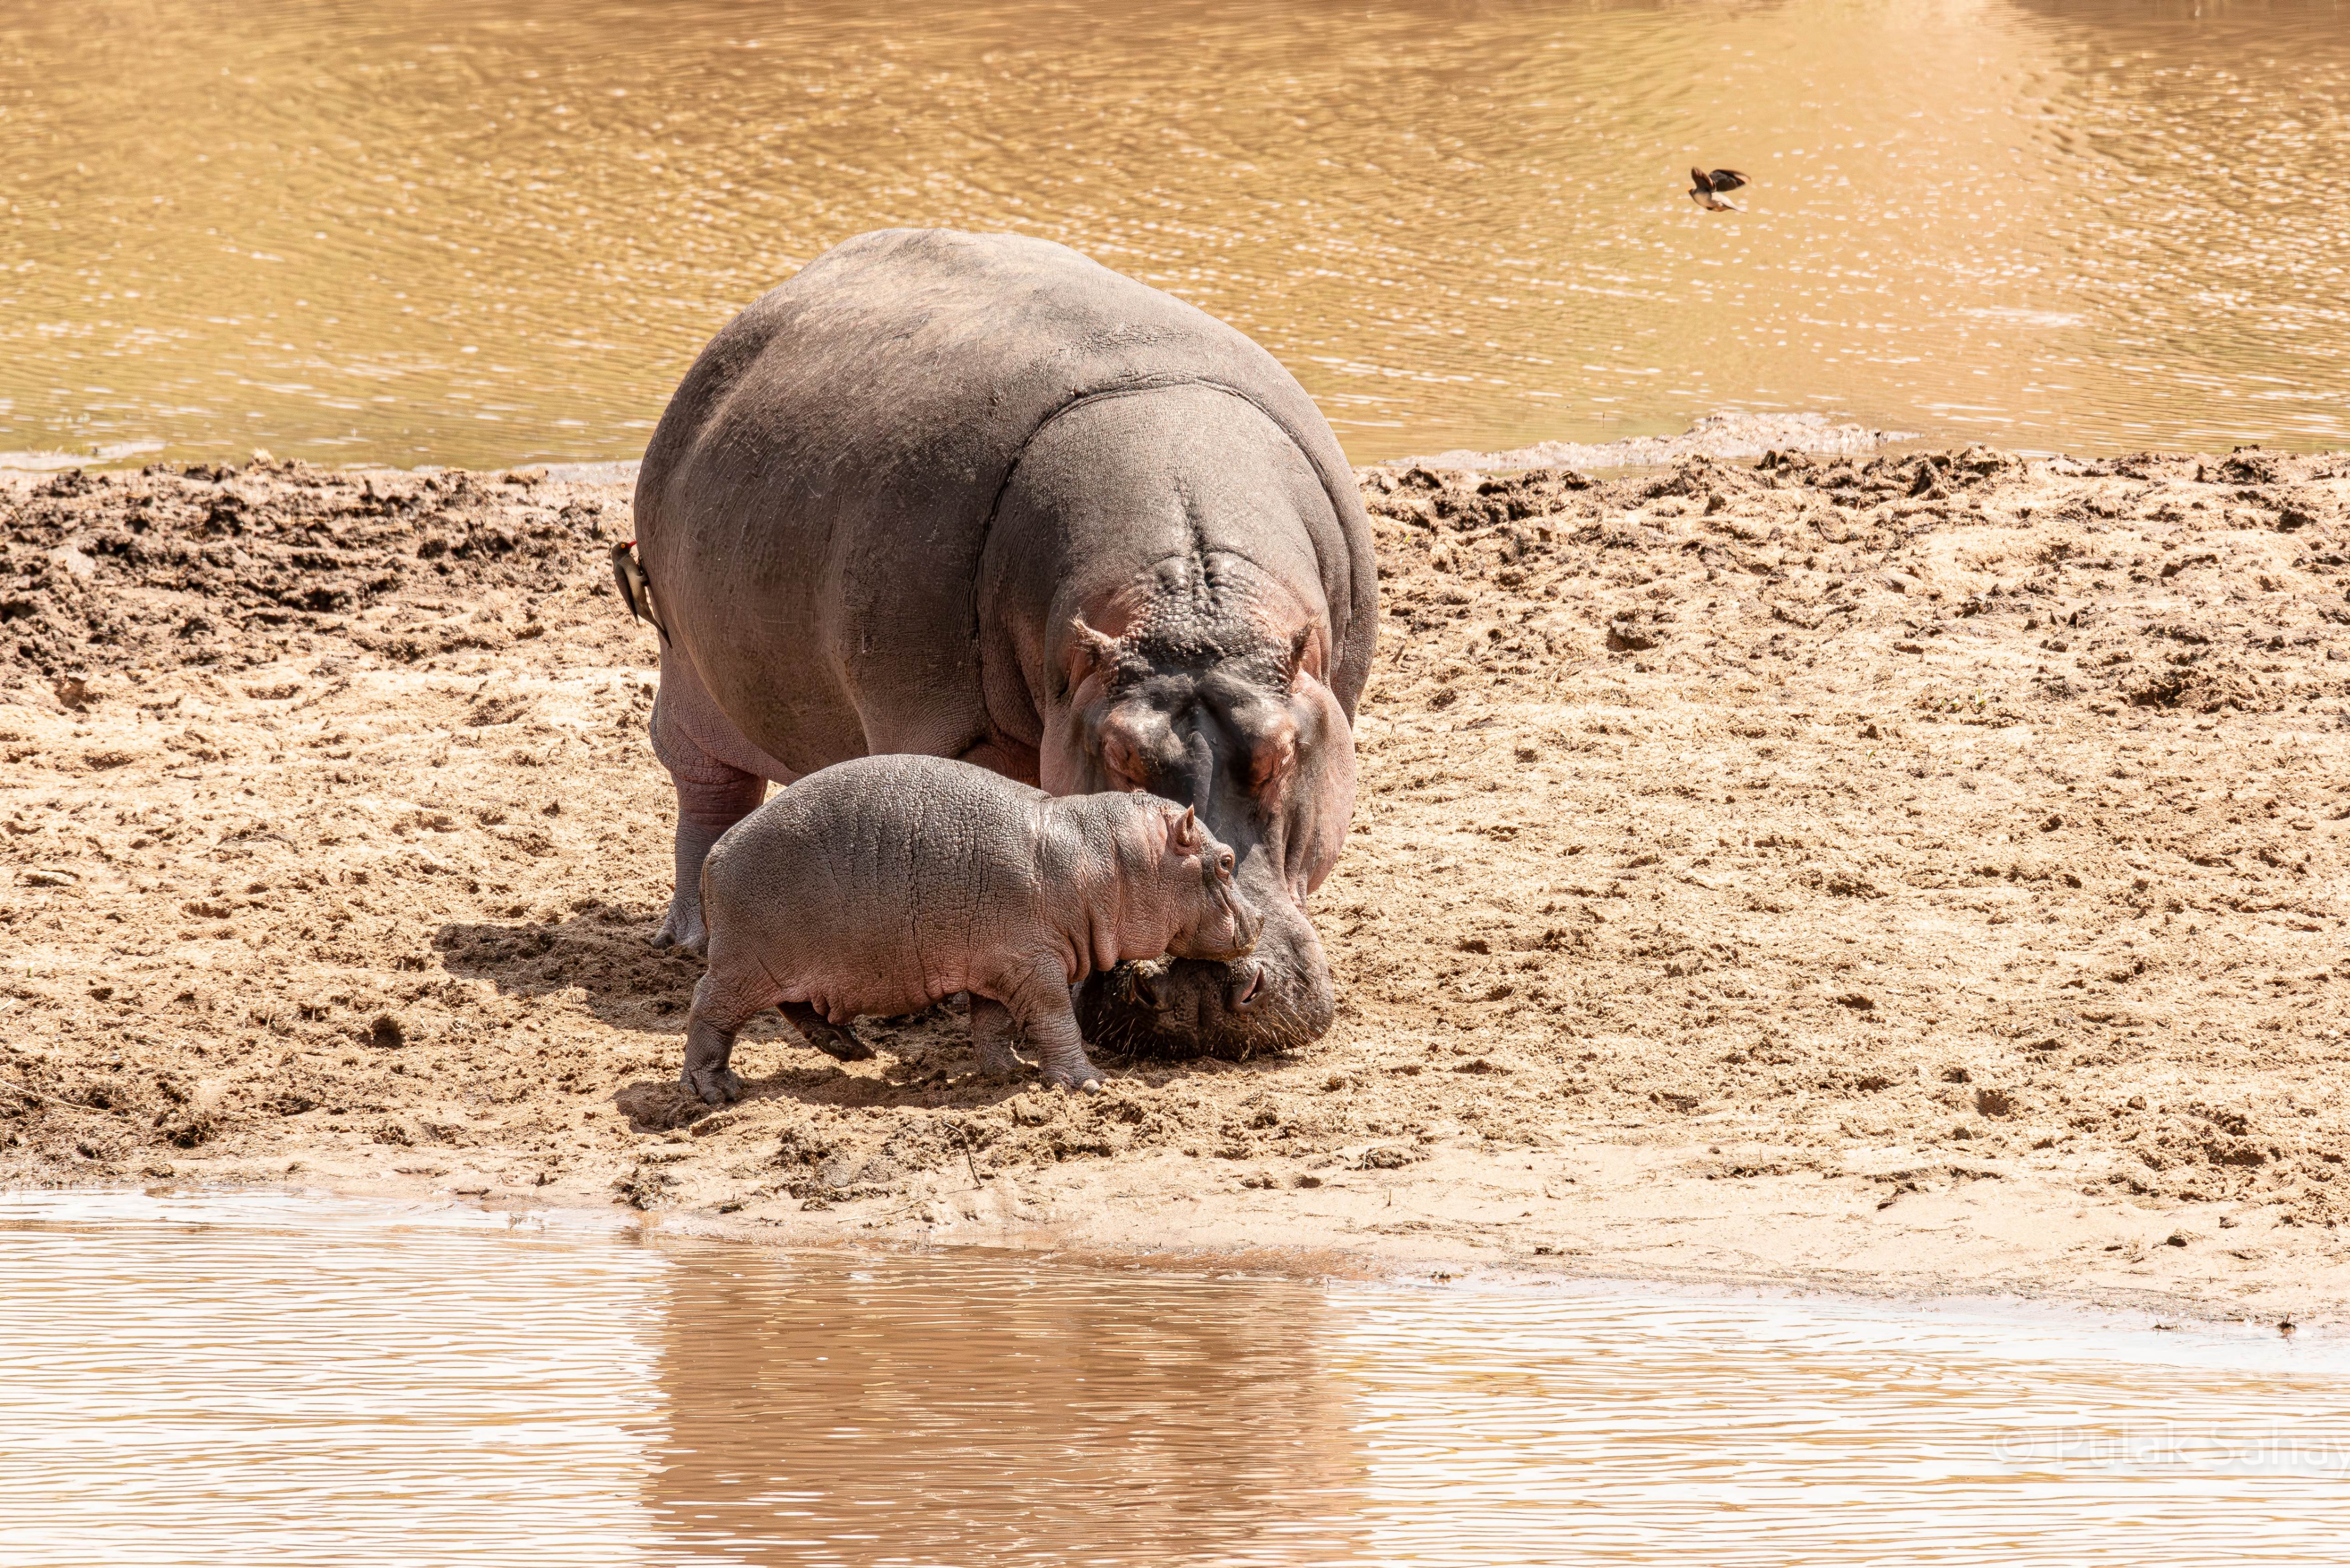 Hippo with baby while Oxpecker cleans ticks